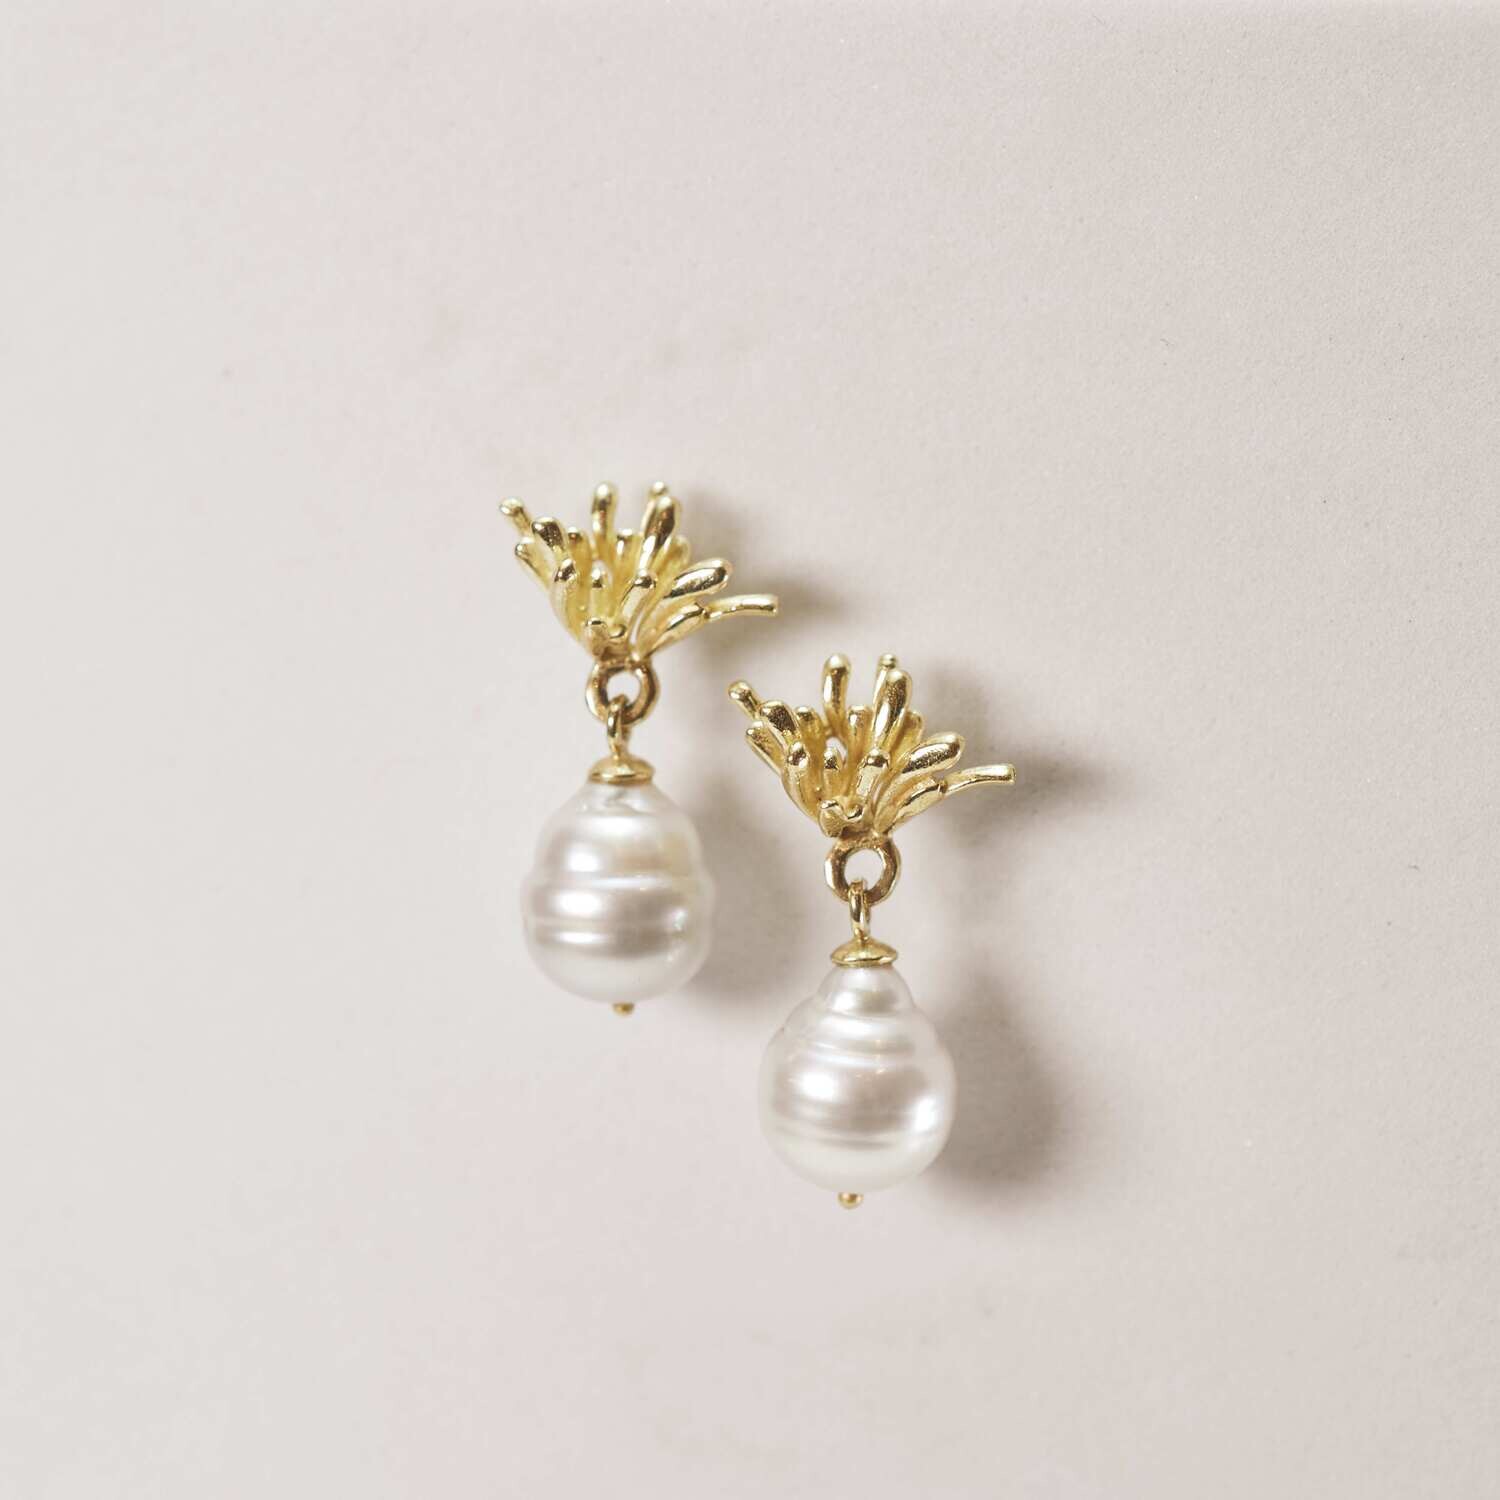 “Irena” White South Sea Pearl And A Spray Of 18K